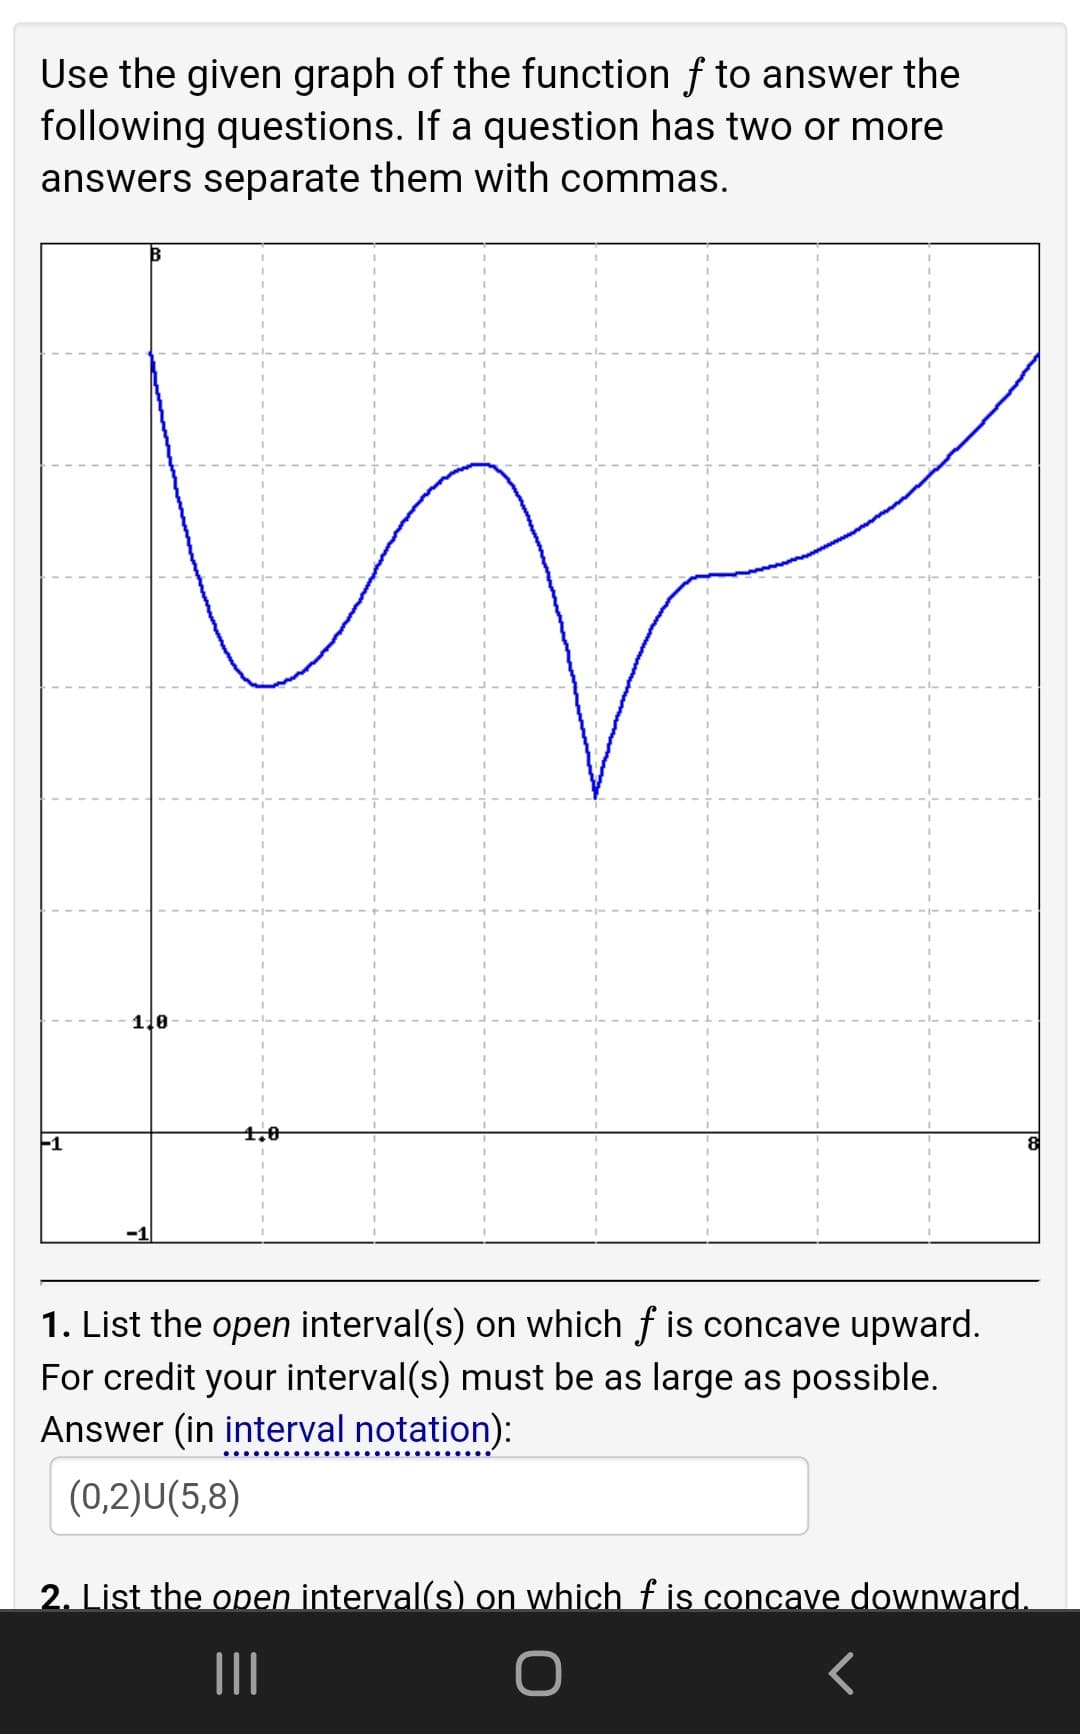 Use the given graph of the function f to answer the
following questions. If a question has two or more
answers separate them with commas.
1.0
4.0
-1
1. List the open interval(s) on which f is concave upward.
For credit your interval(s) must be as large as possible.
Answer (in interval notation):
(0,2)U(5,8)
2. List the open interval(s) on which f is concave downward.
II
